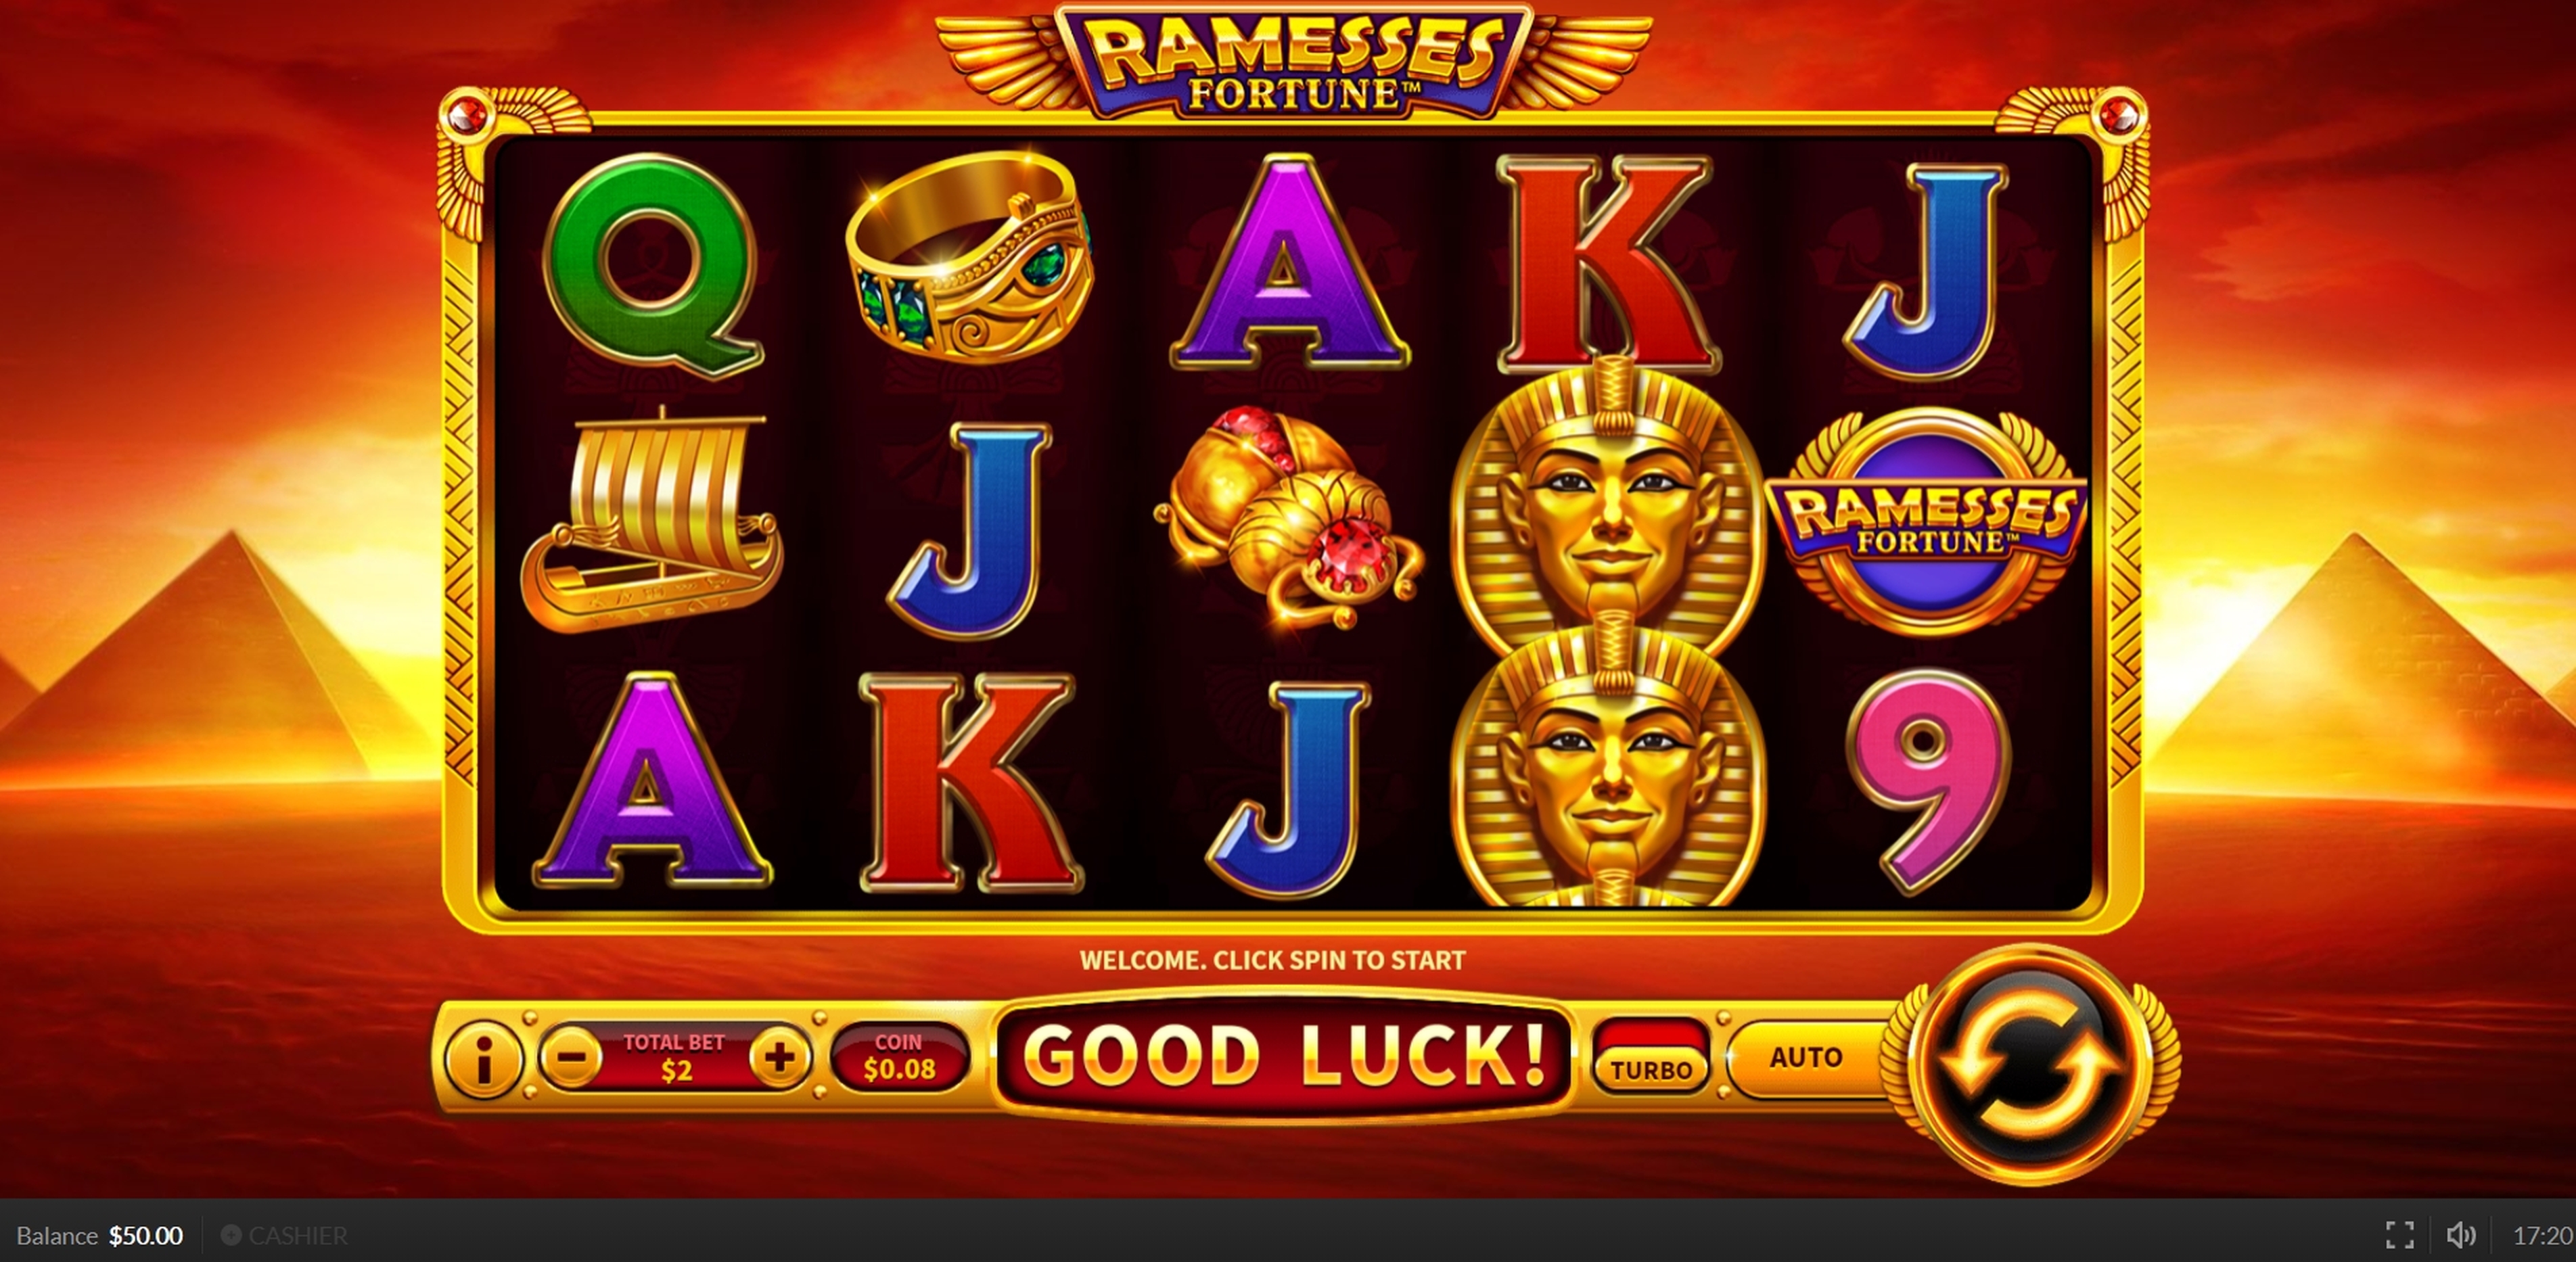 Reels in Ramesses Fortune Slot Game by Skywind